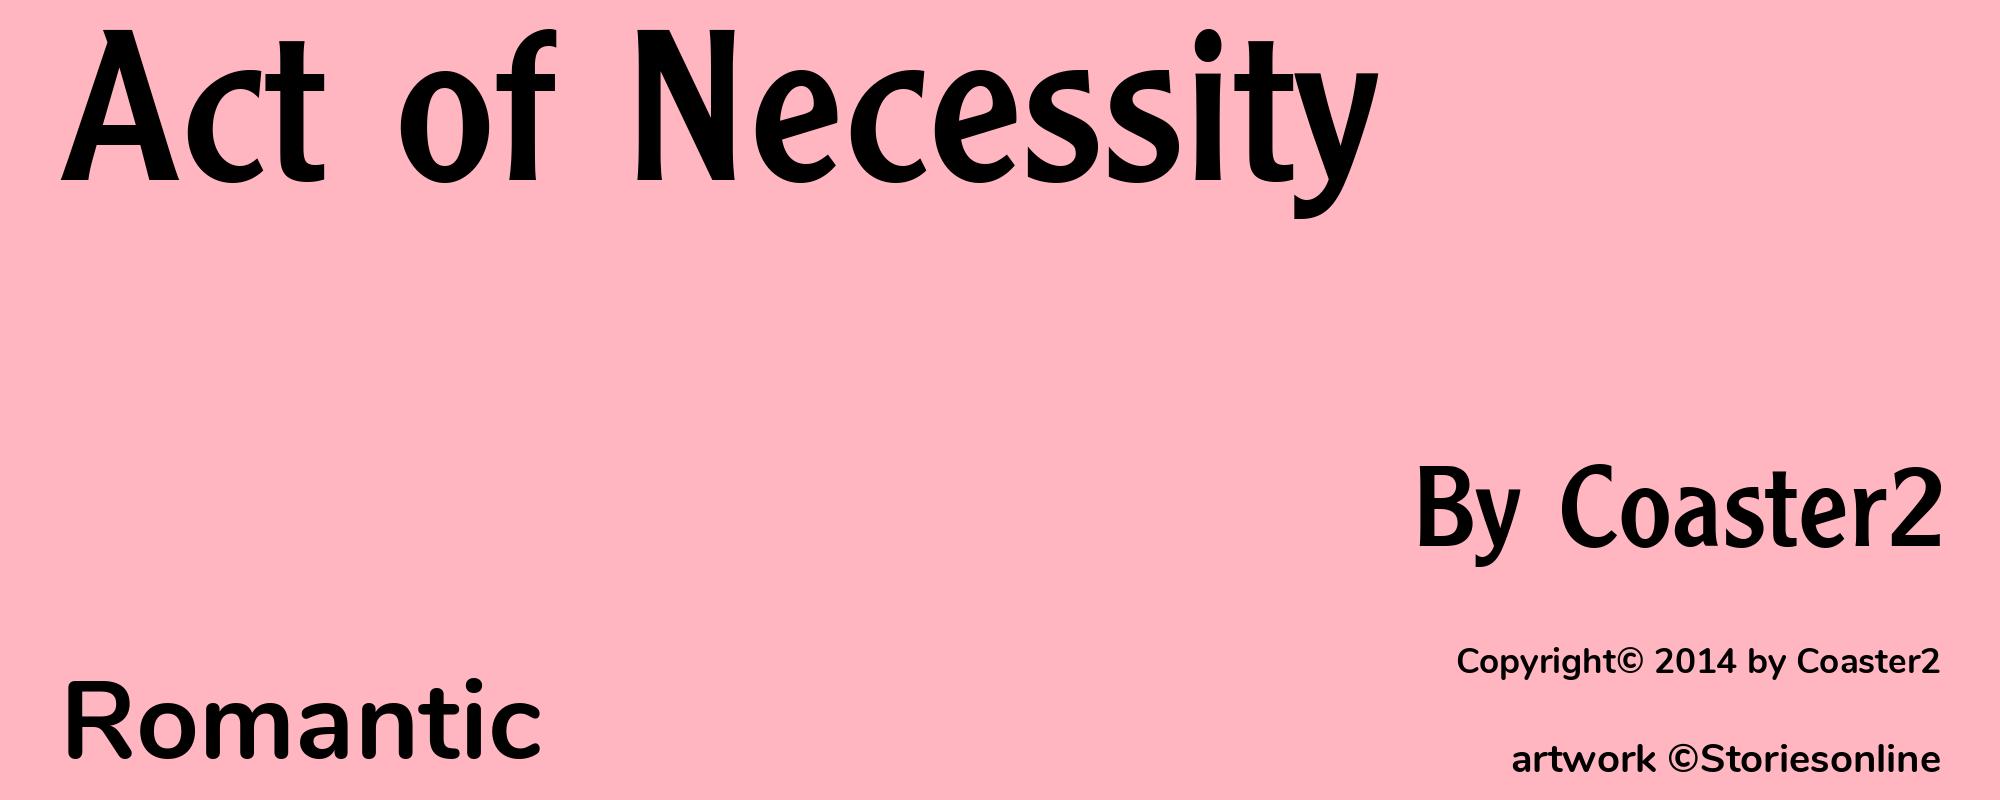 Act of Necessity - Cover